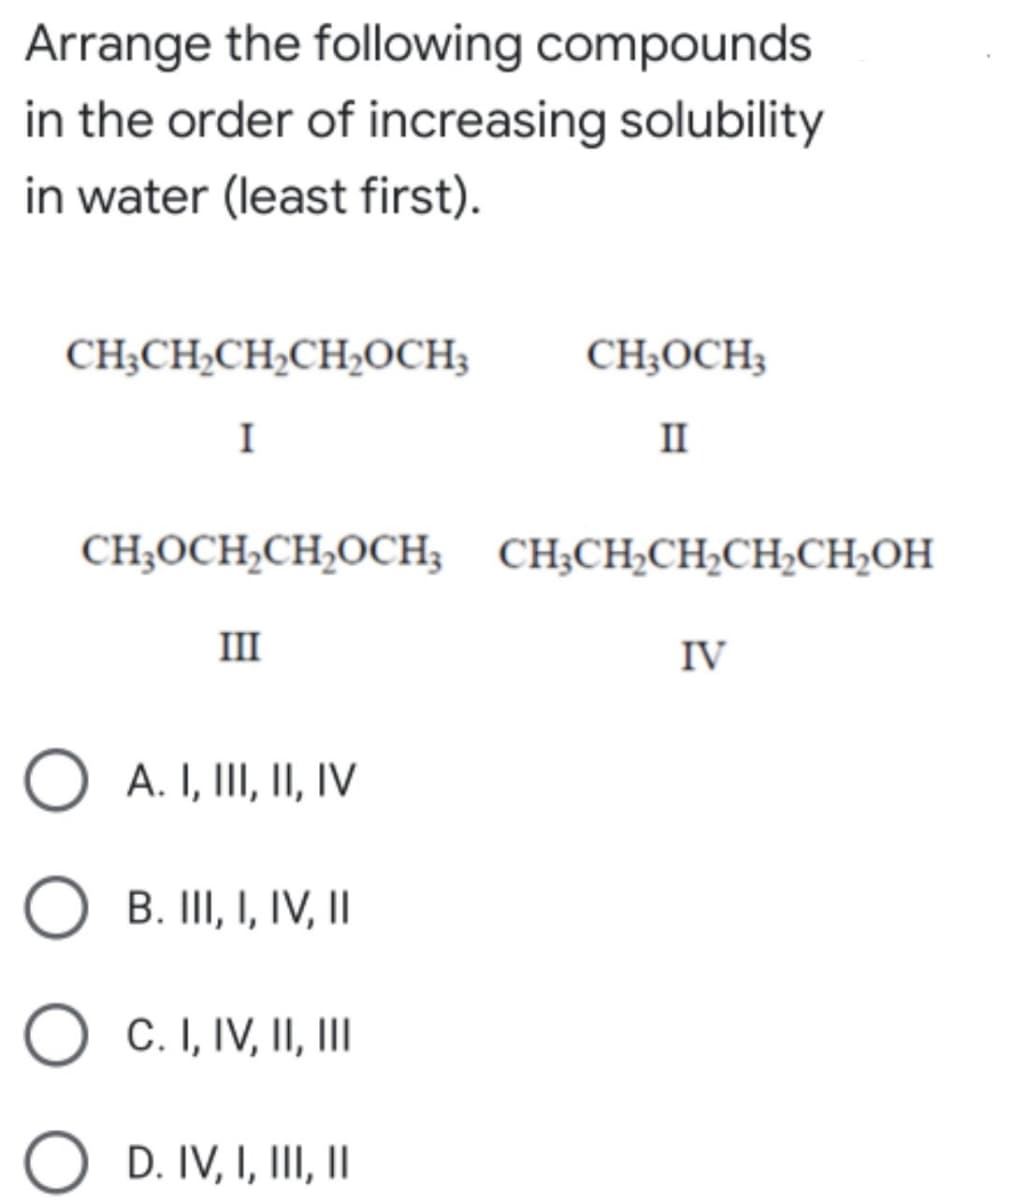 Arrange the following compounds
in the order of increasing solubility
in water (least first).
CH;CH,CH,CH,OCH3
CH;OCH3
I
II
CH;OCH,CH,OCH; CH;CH;CH;CH,CH;OH
III
IV
O A. I, III, II, IV
O
B. III, I, IV, II
C. I, IV, II,II
D. IV, I, III, I
